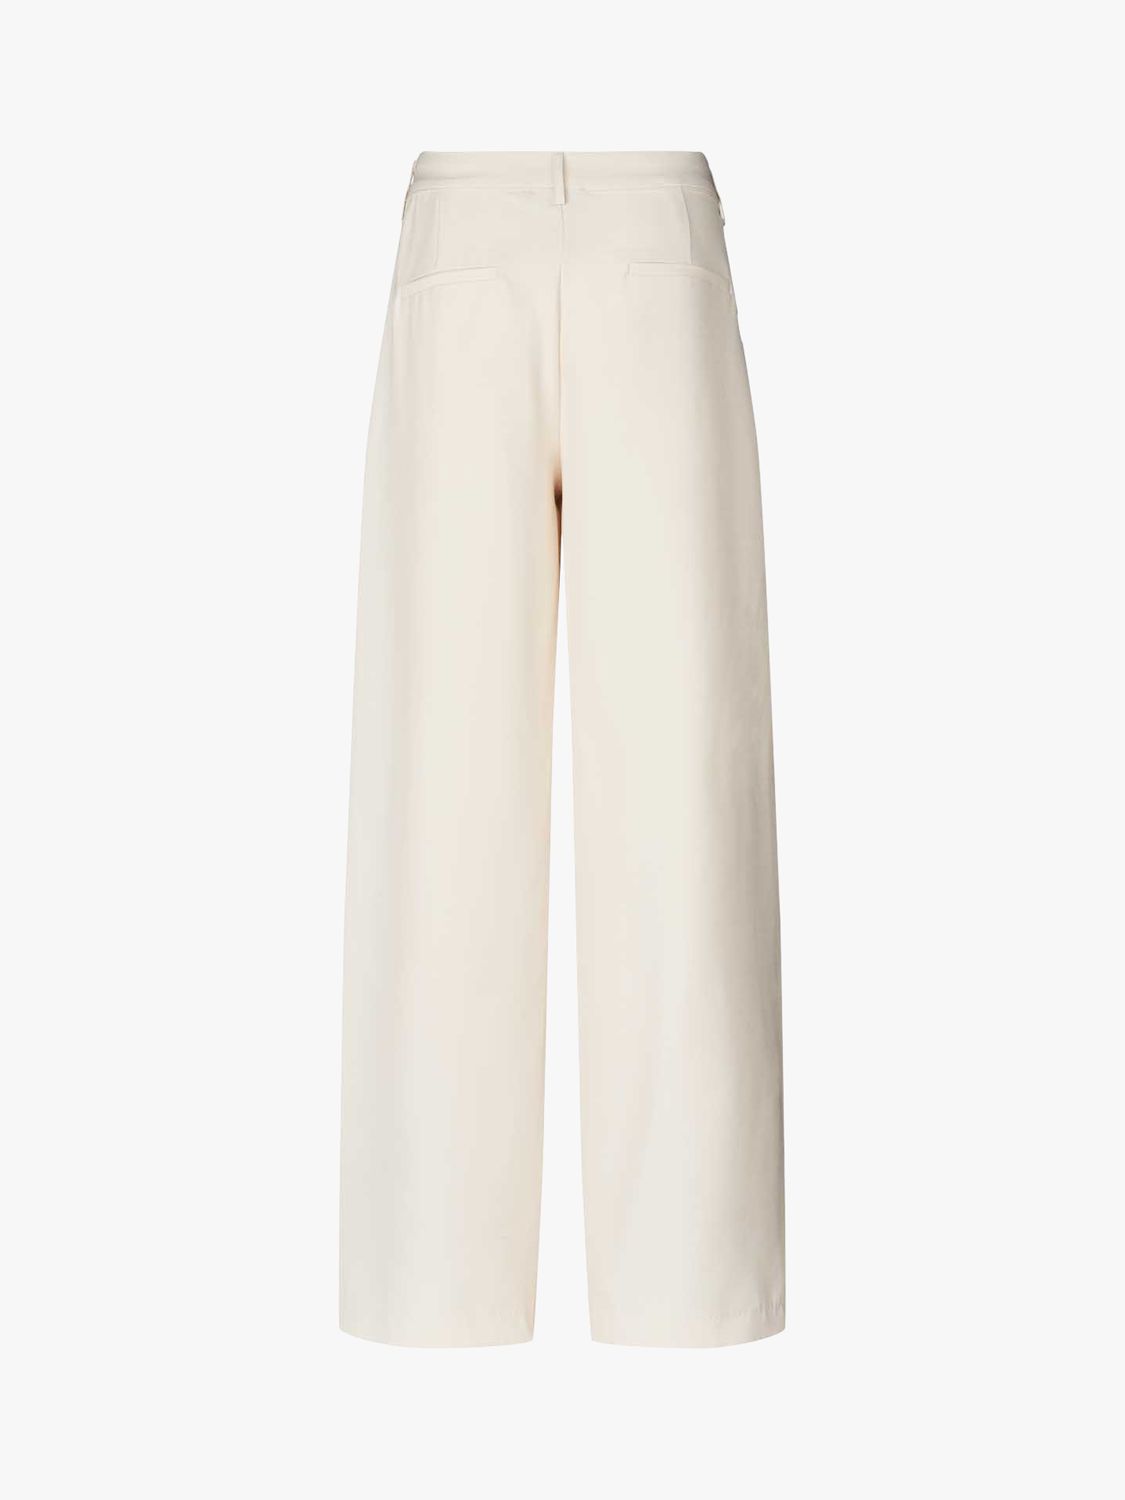 Lolly's Laundry Leo Straight Fit Trousers, Creme, L